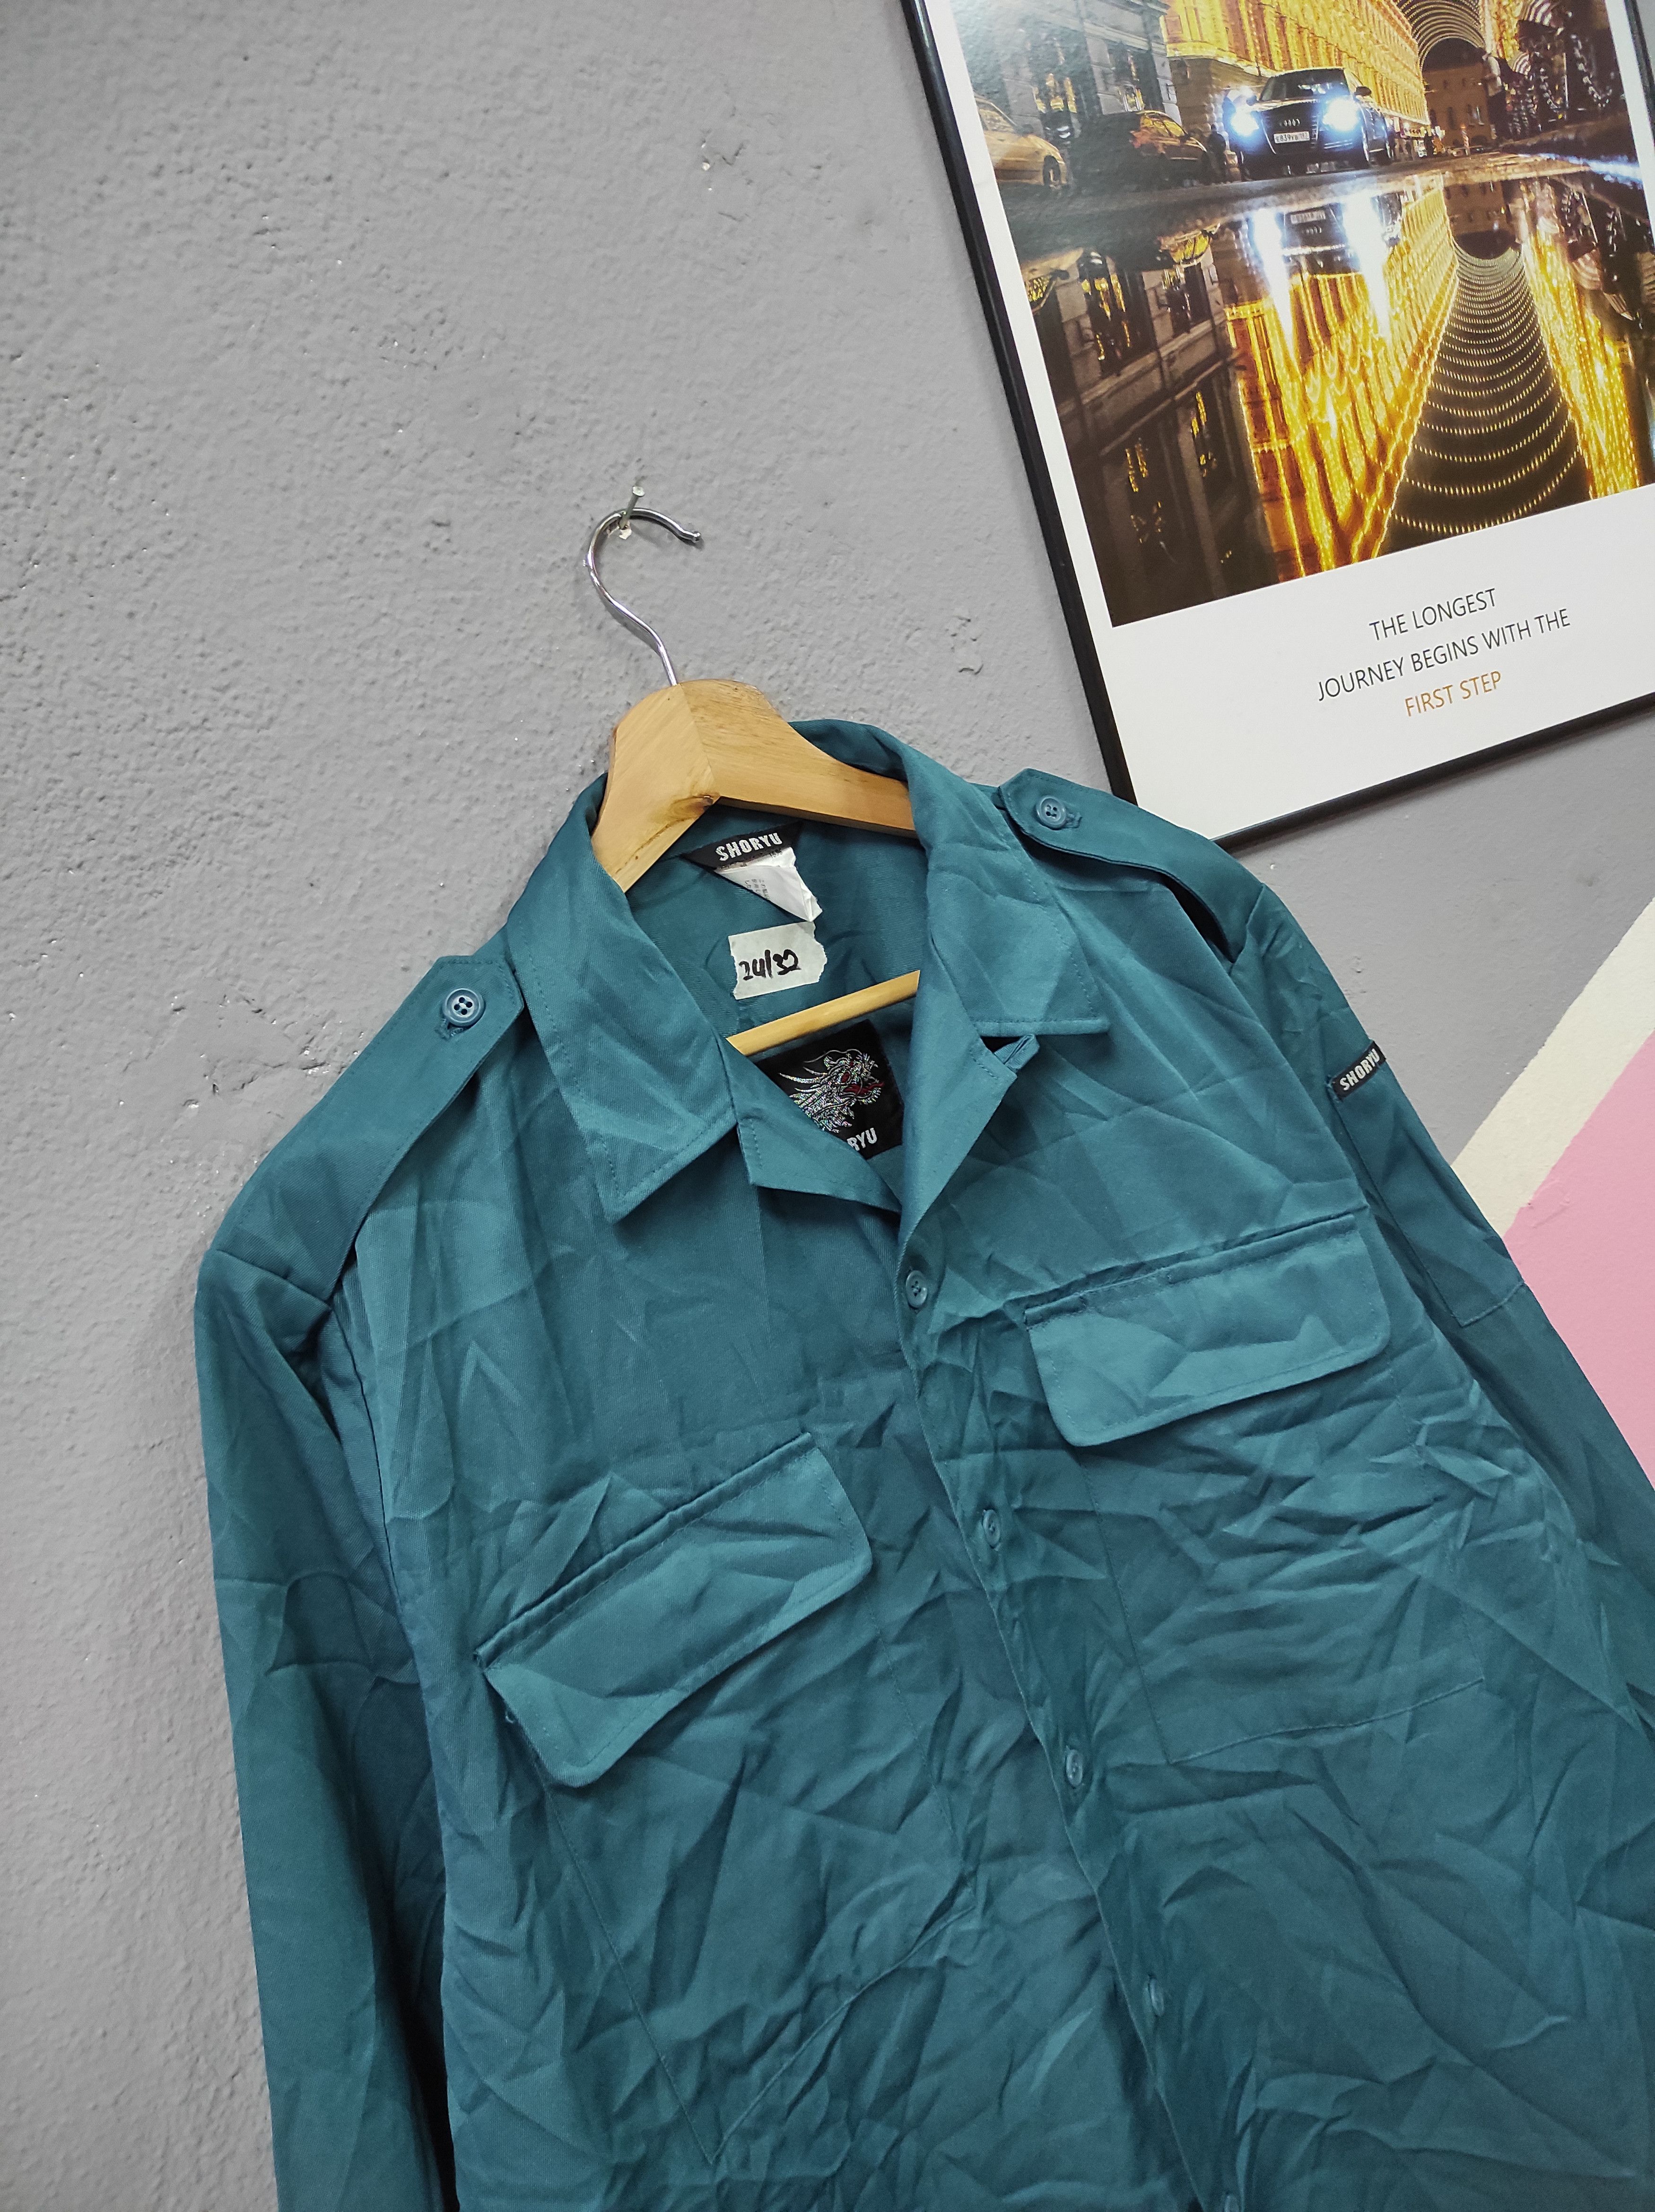 Workers SHORYU SHIRT WORKWEAR Size US L / EU 52-54 / 3 - 2 Preview